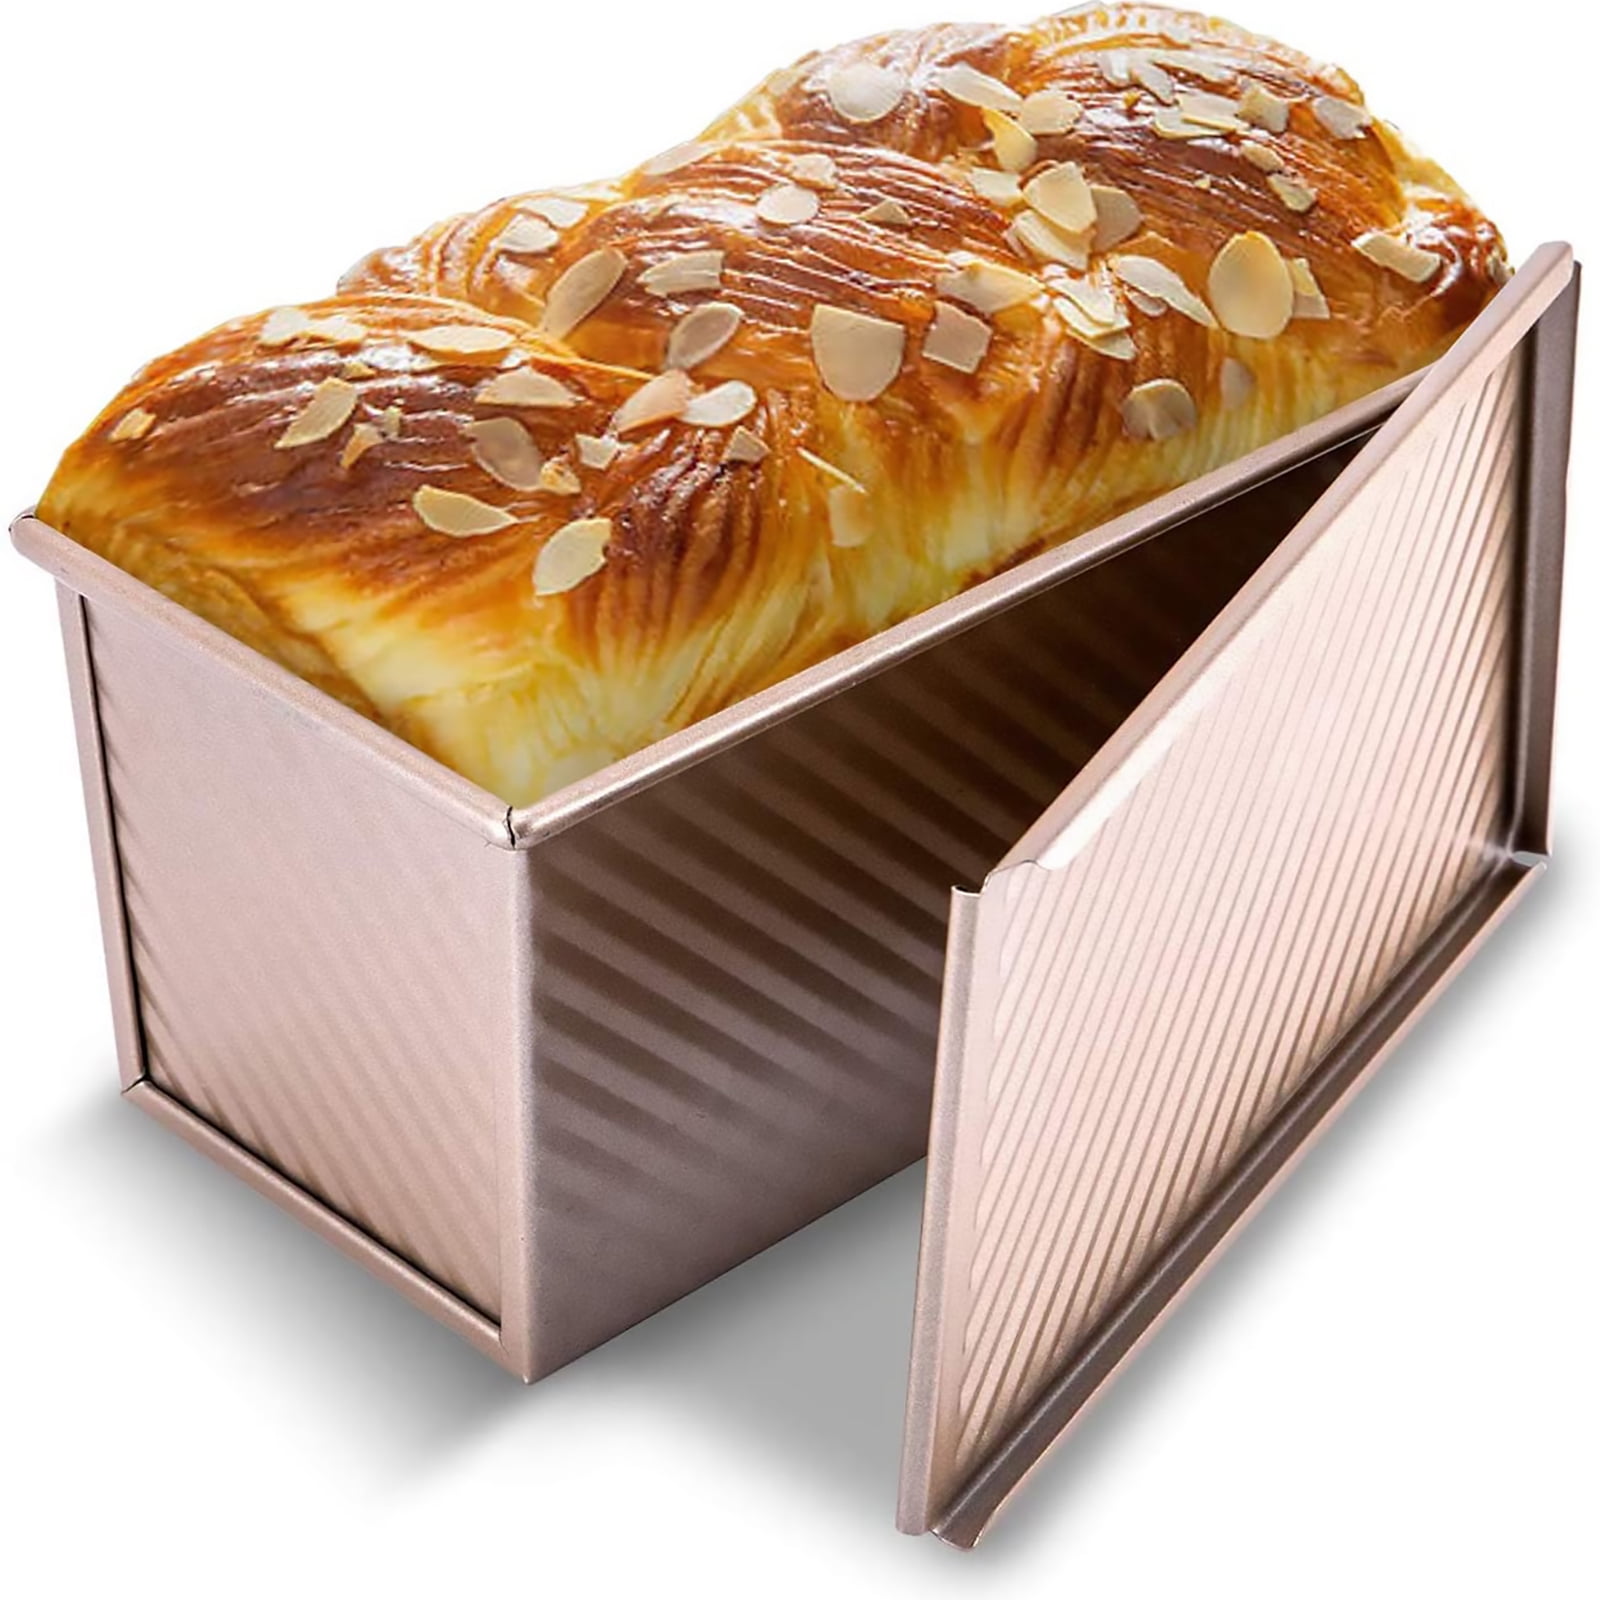 Warm & Toasty Loaf Pan with Napkin - Stamped